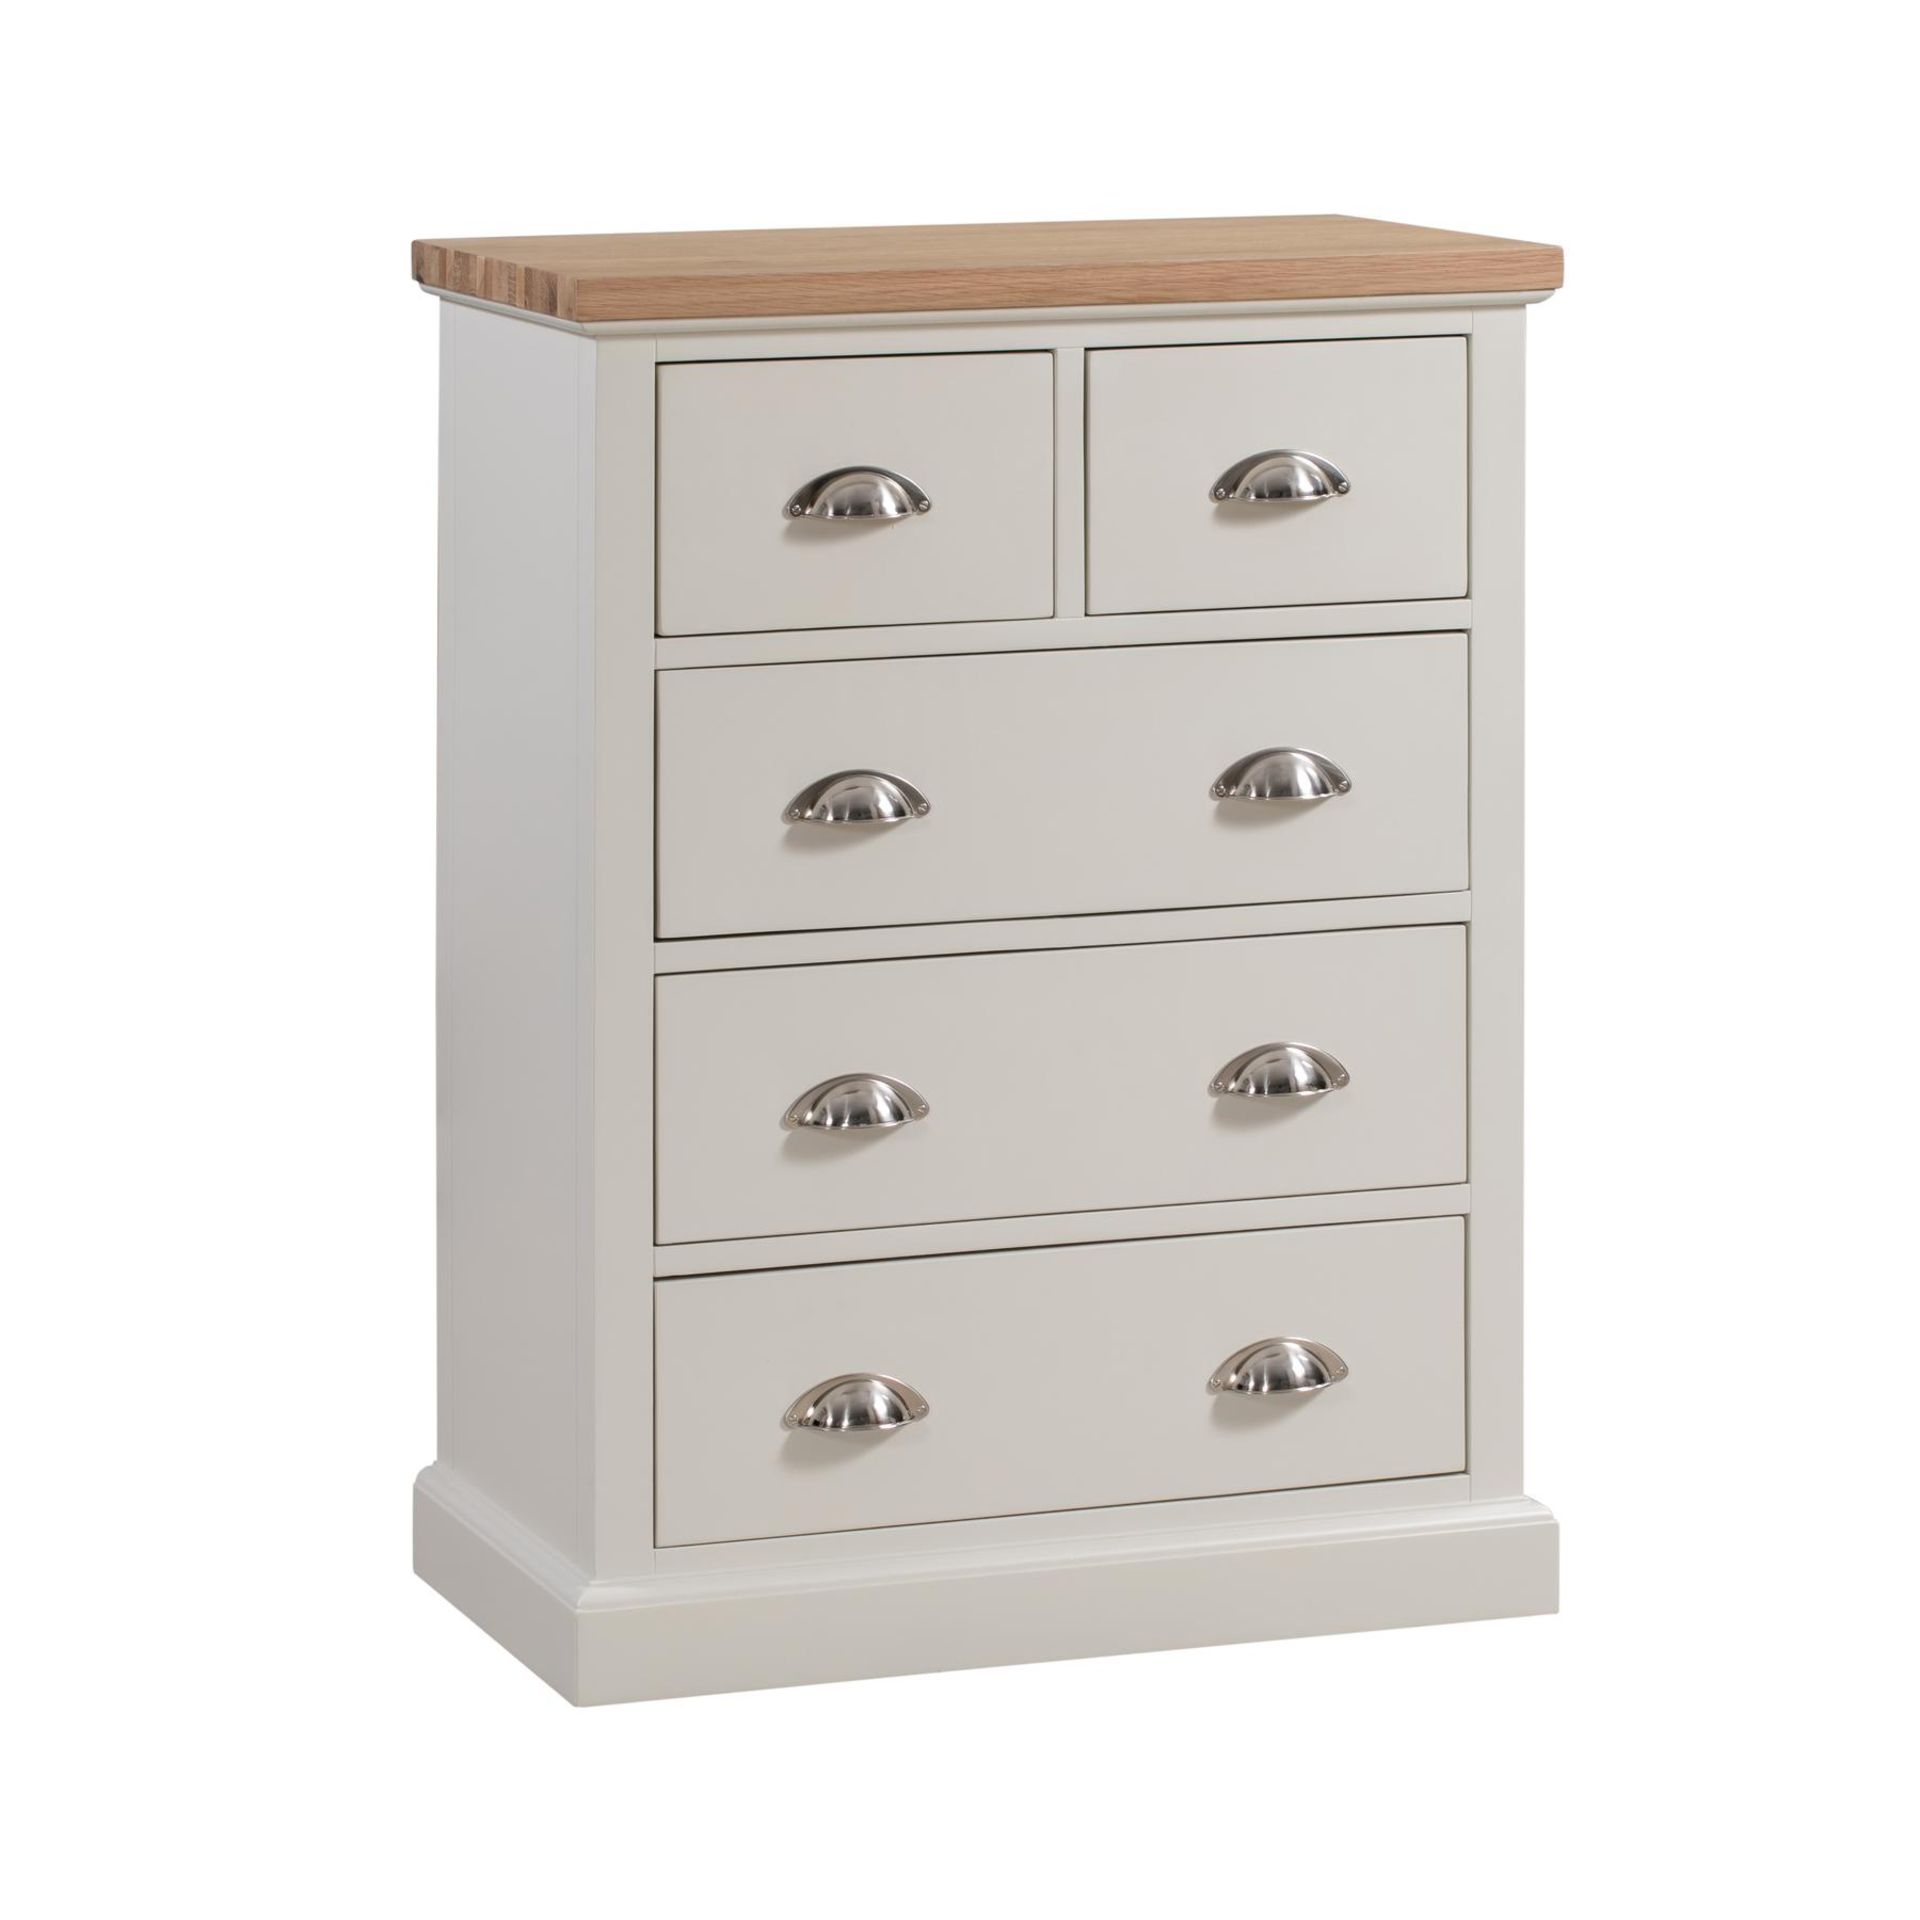 Ripley Collection Two Over Three Drawer Chest Of Drawers, A Functional Item Of This Collection